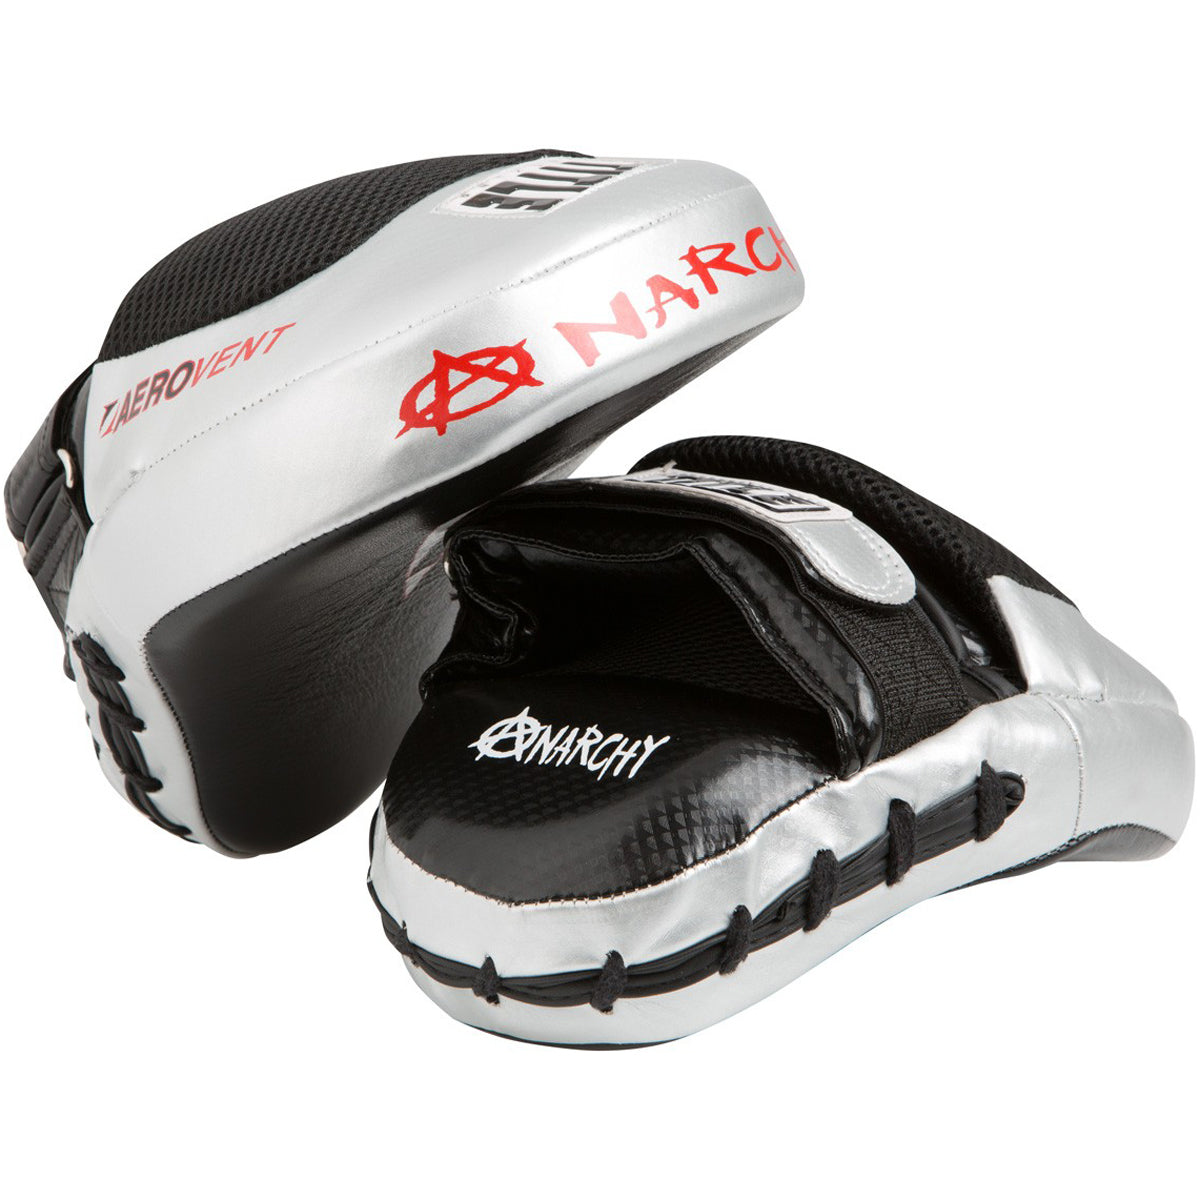 Title Boxing Aerovent Anarchy Punch Mitts - Black/Silver Title Boxing